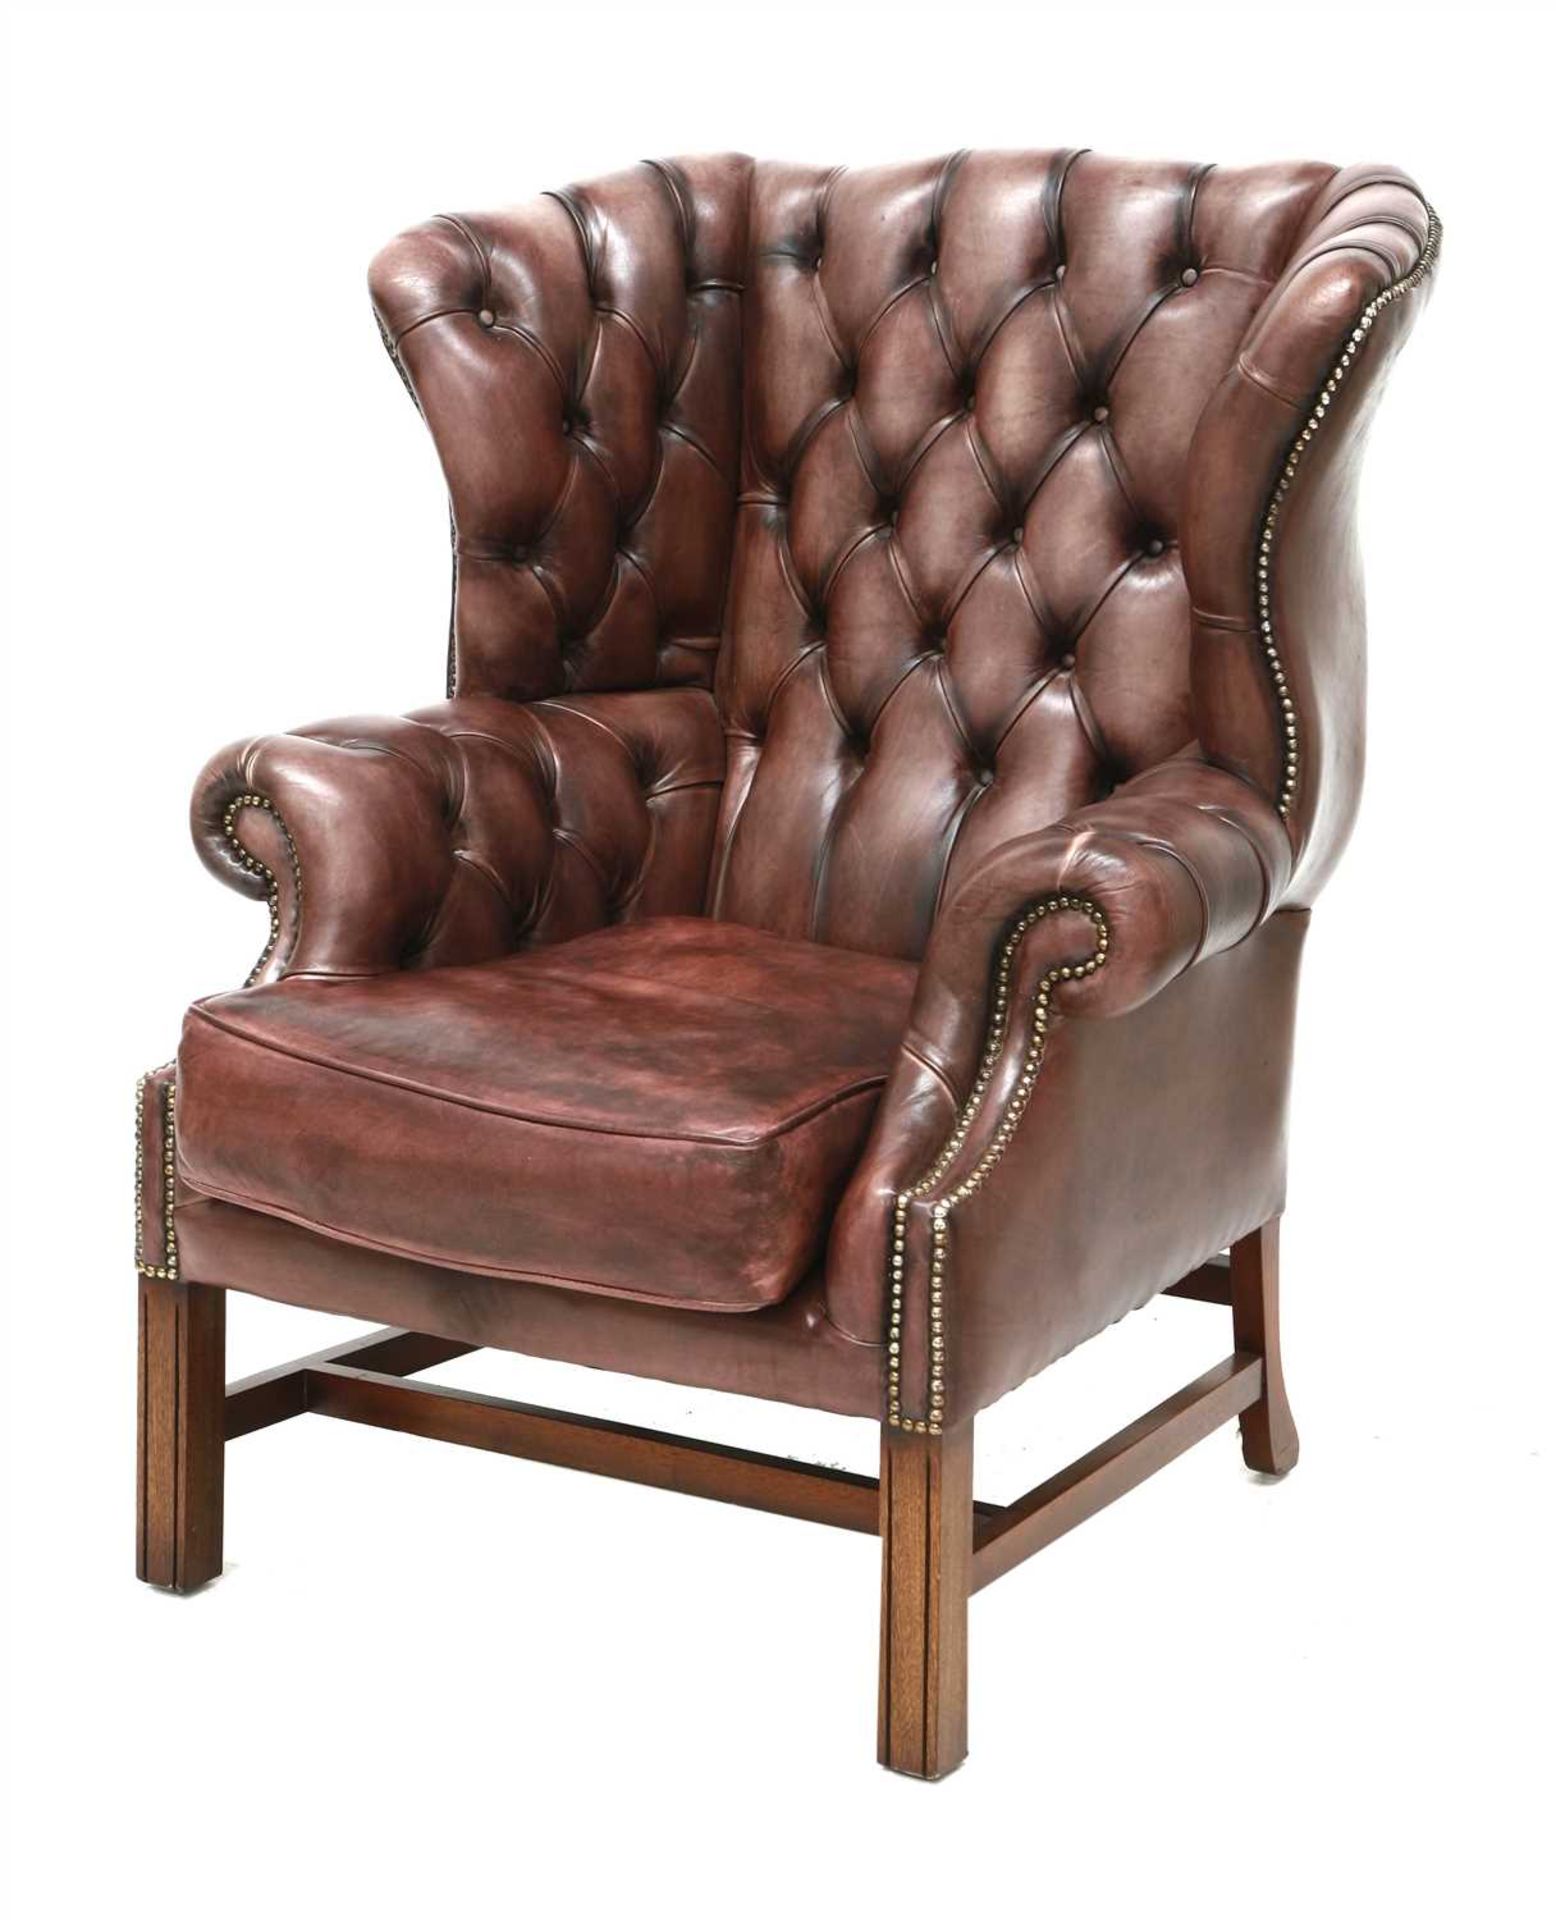 A deep buttoned brown leather wing armchair,